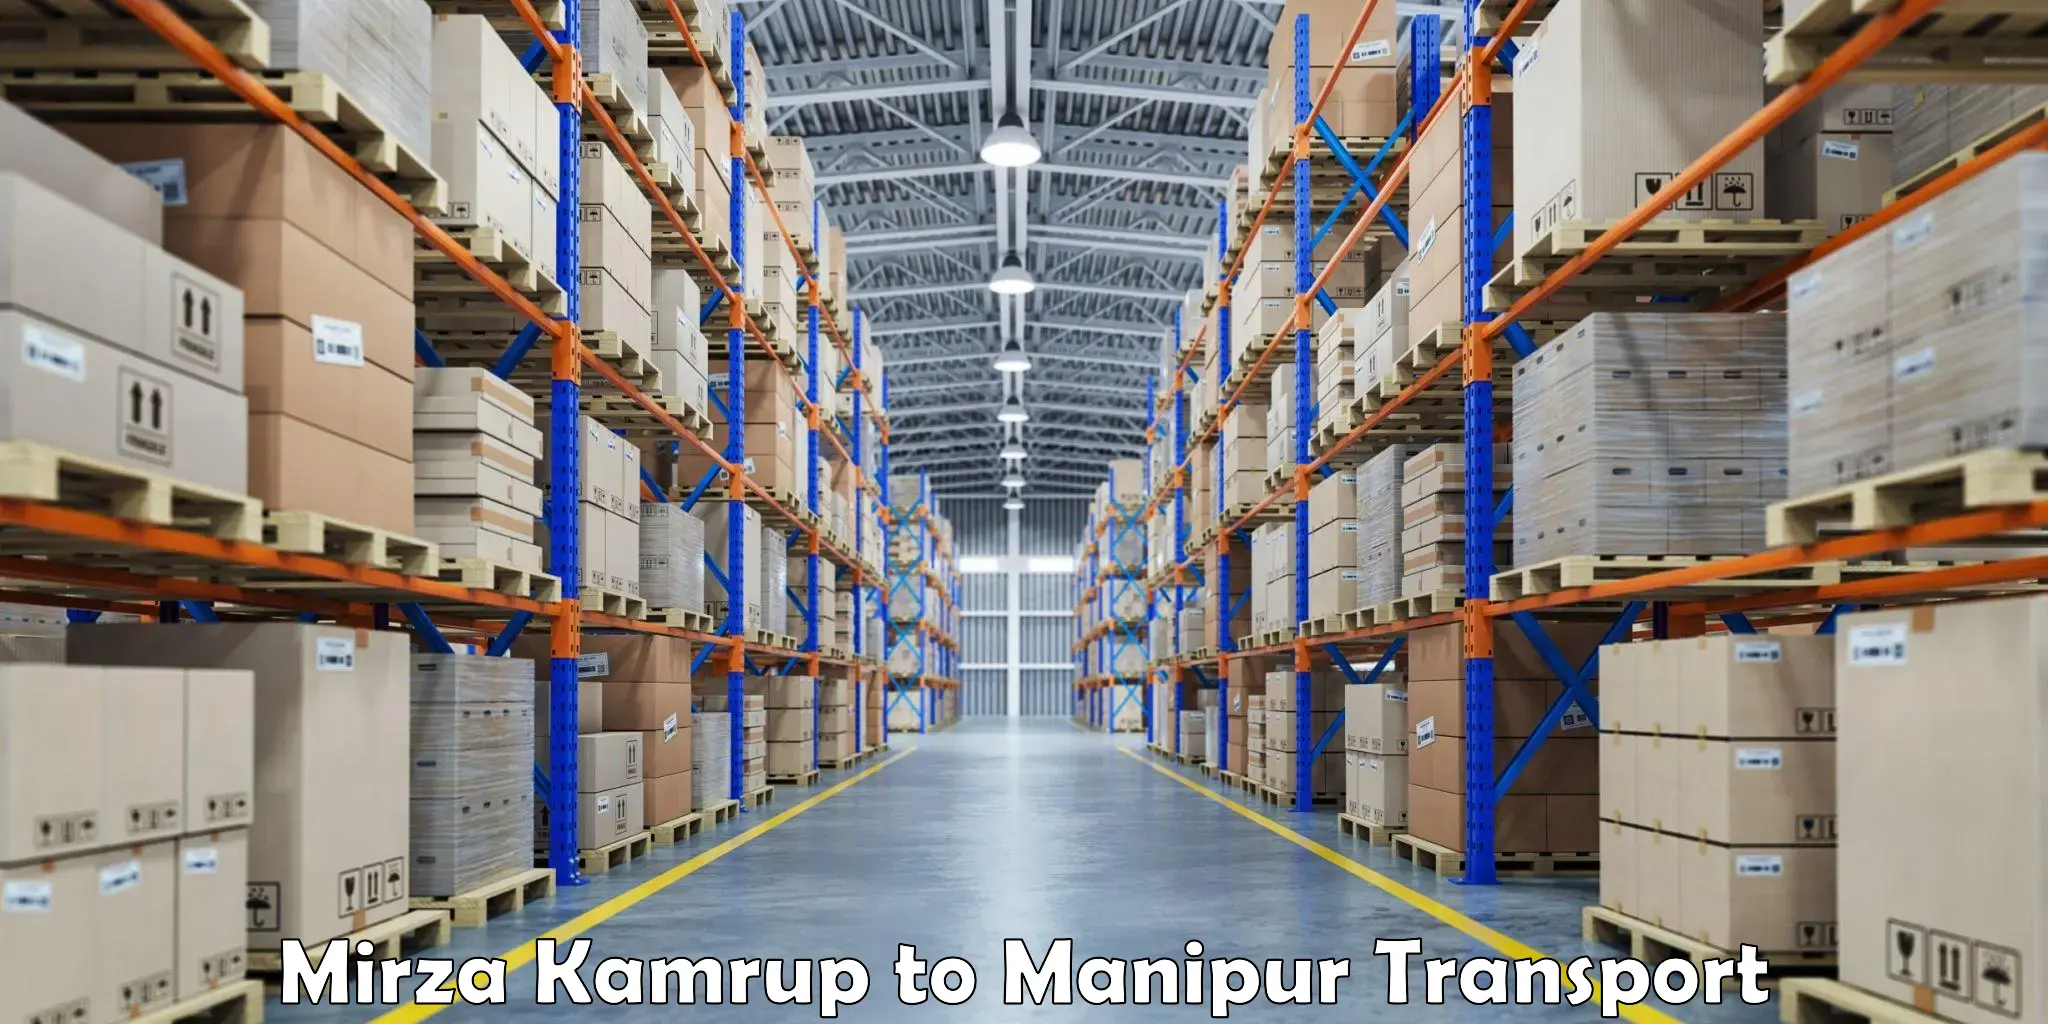 Road transport online services Mirza Kamrup to Imphal